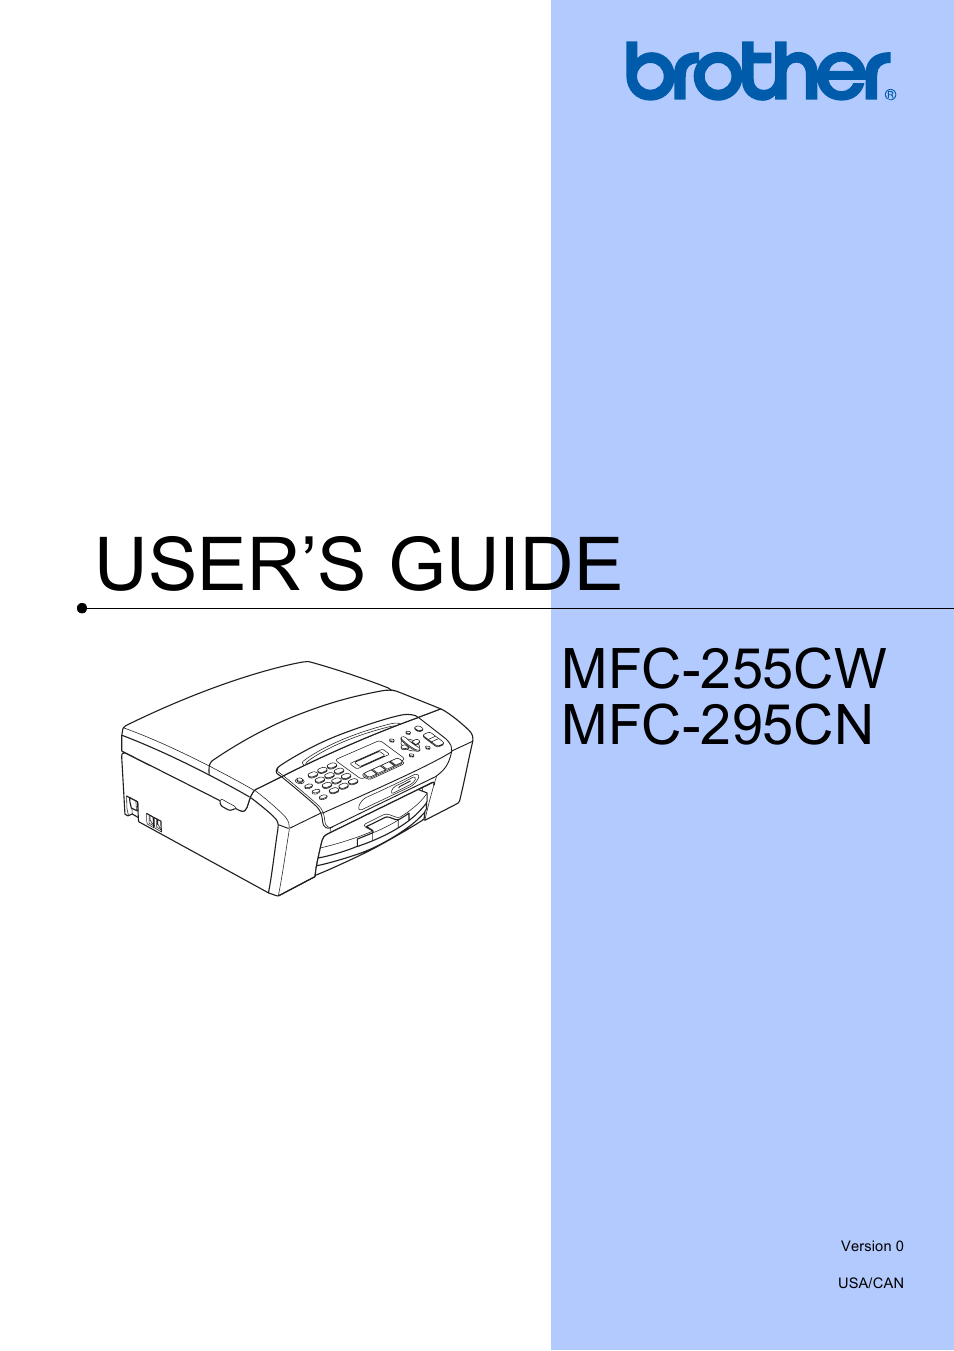 BROTHER MFC 255CW MANUAL PDF